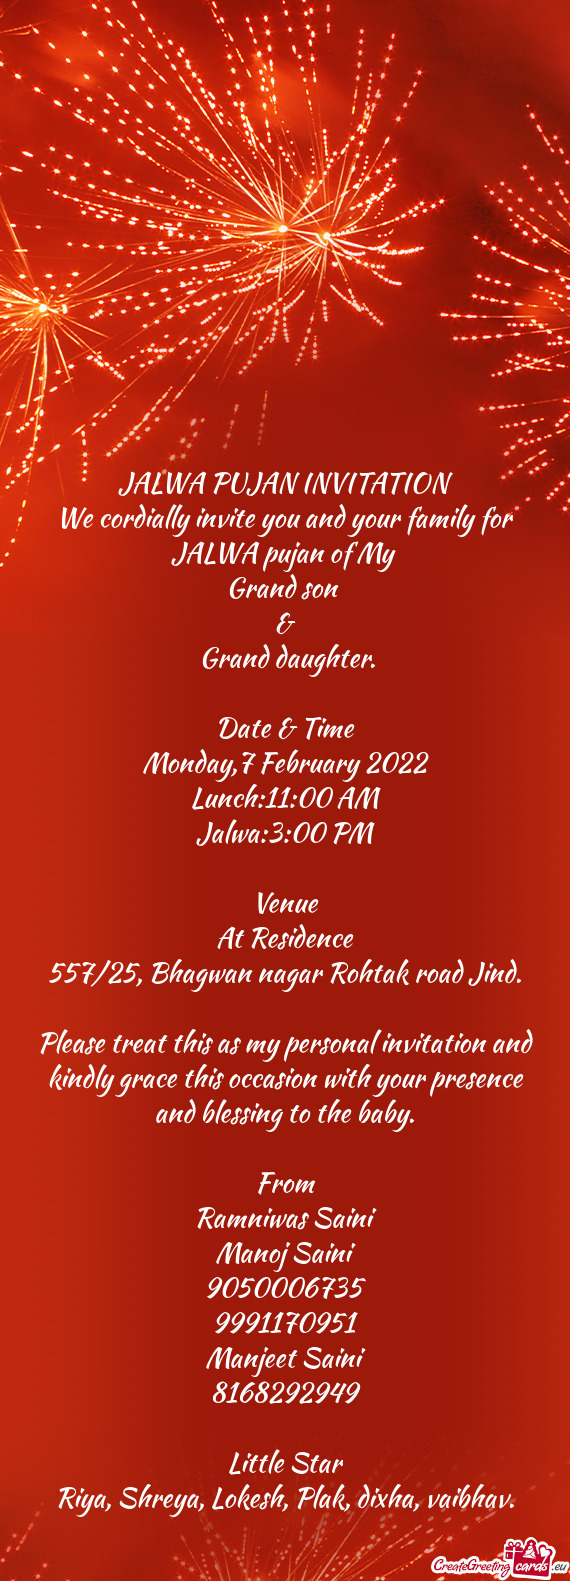 JALWA PUJAN INVITATION
 We cordially invite you and your family for JALWA pujan of My 
 Grand son